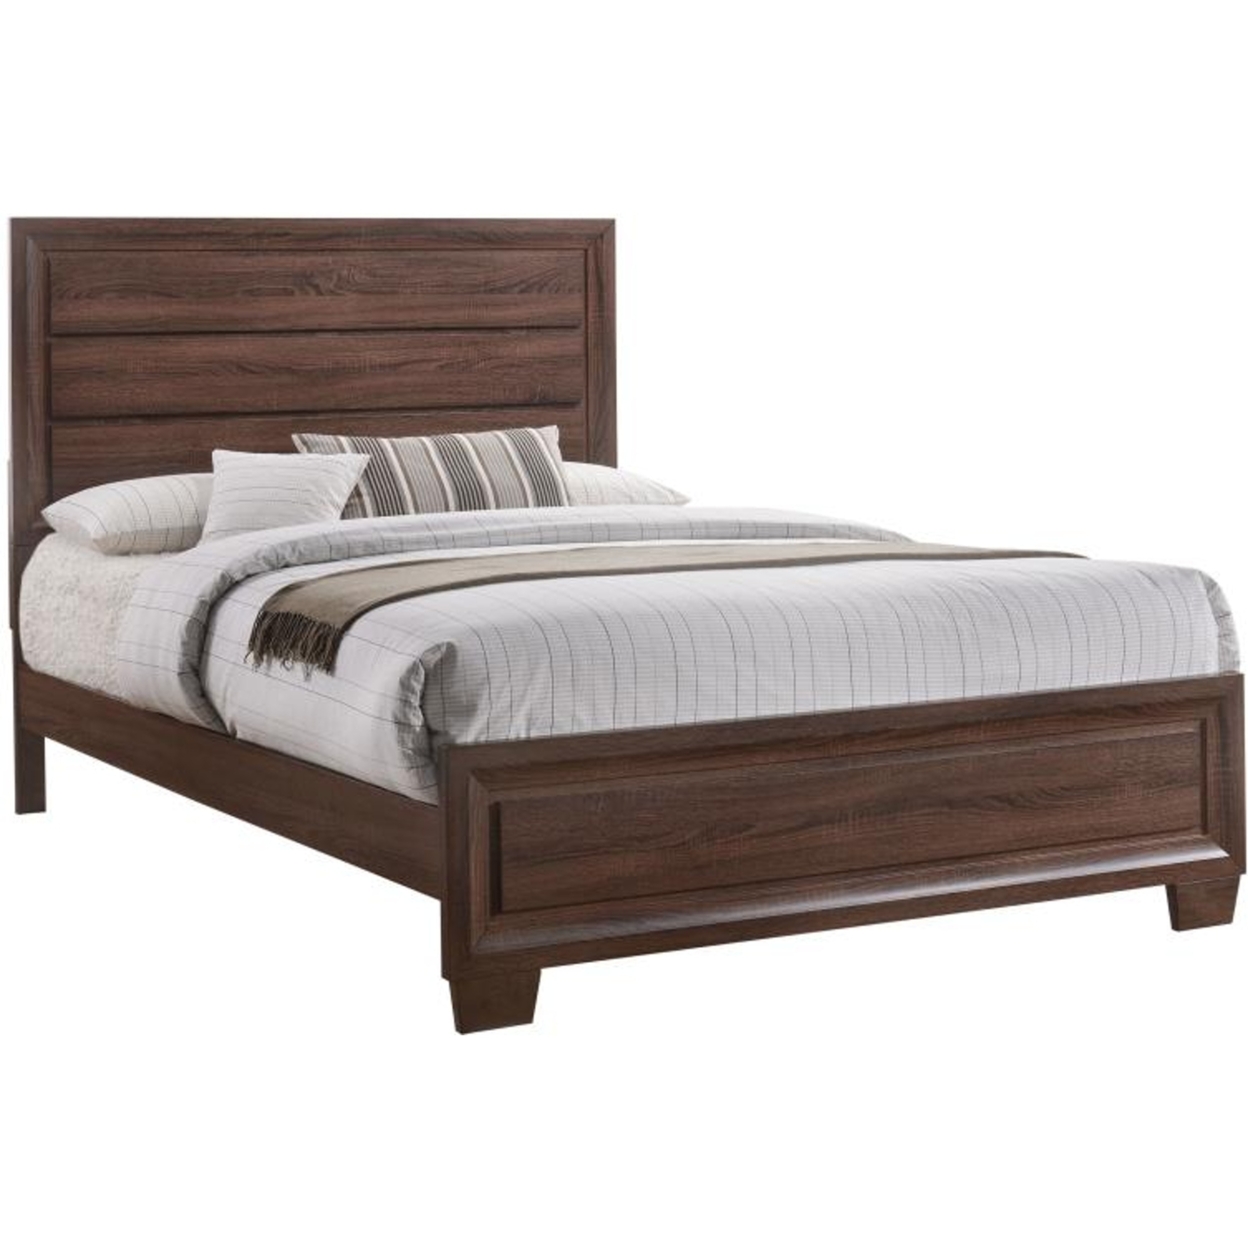 Transitional Wooden Eastern King Size Bed With Plank Headboard, Brown- Saltoro Sherpi